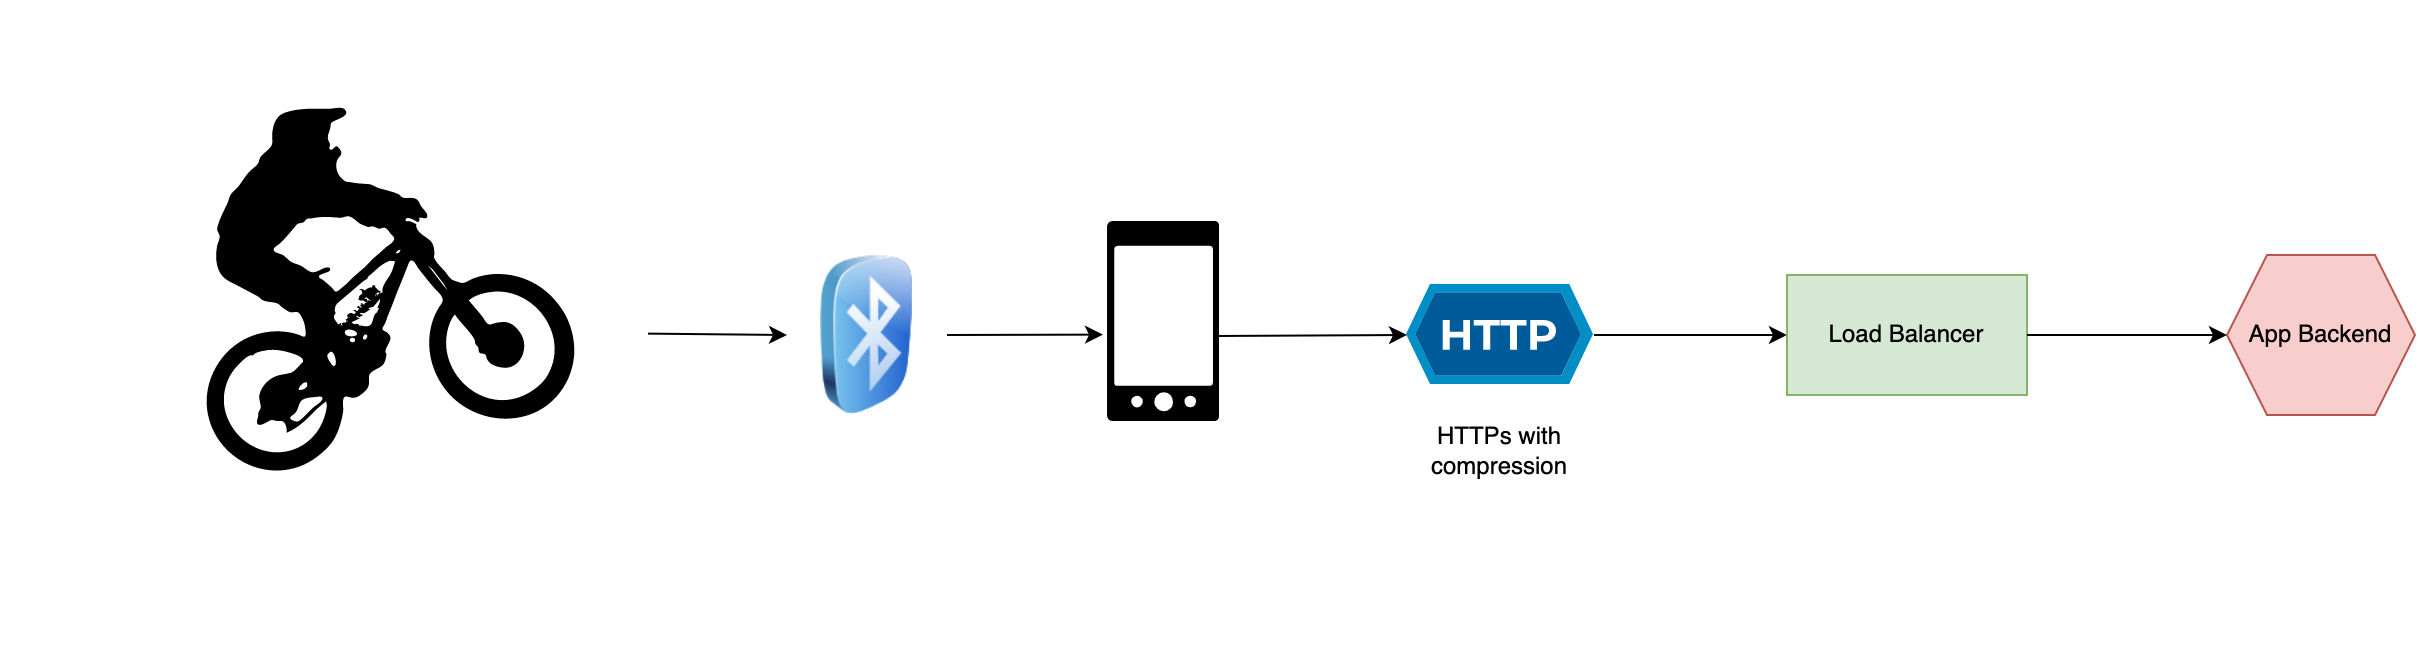 Smartphone app connection